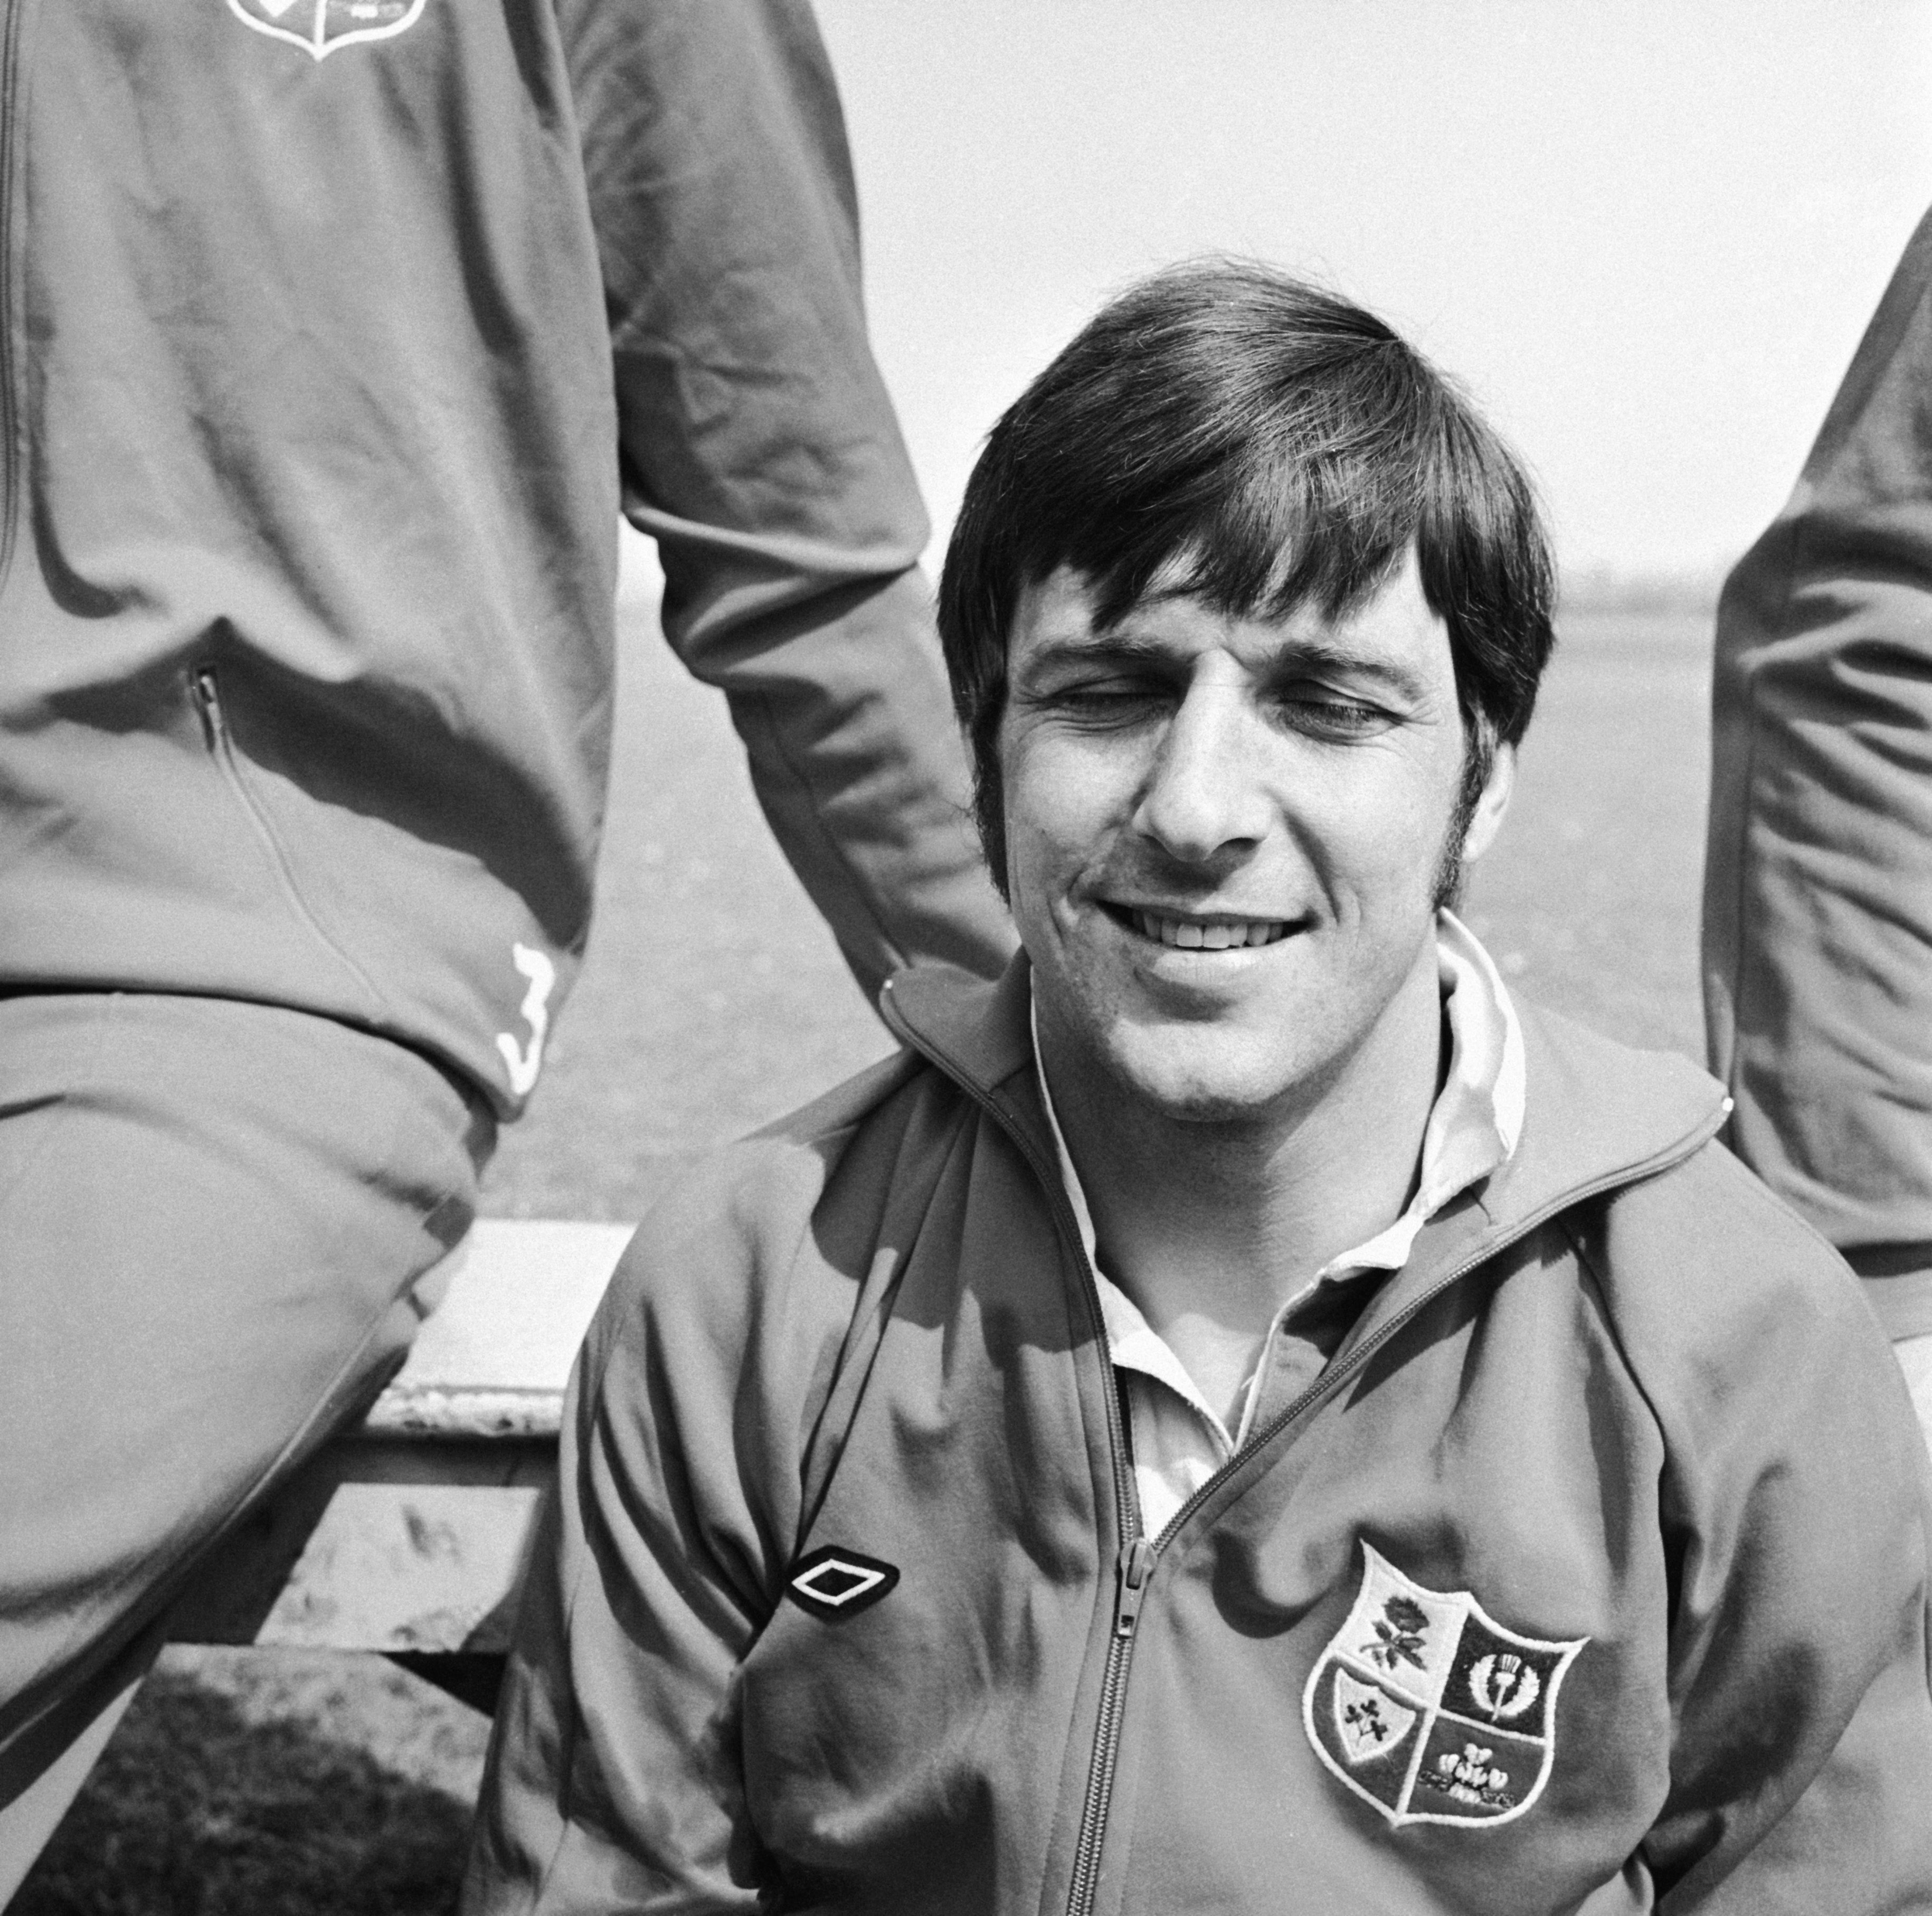 Barry John pictured ahead of the Lions tour of Australia and New Zealand in 1971